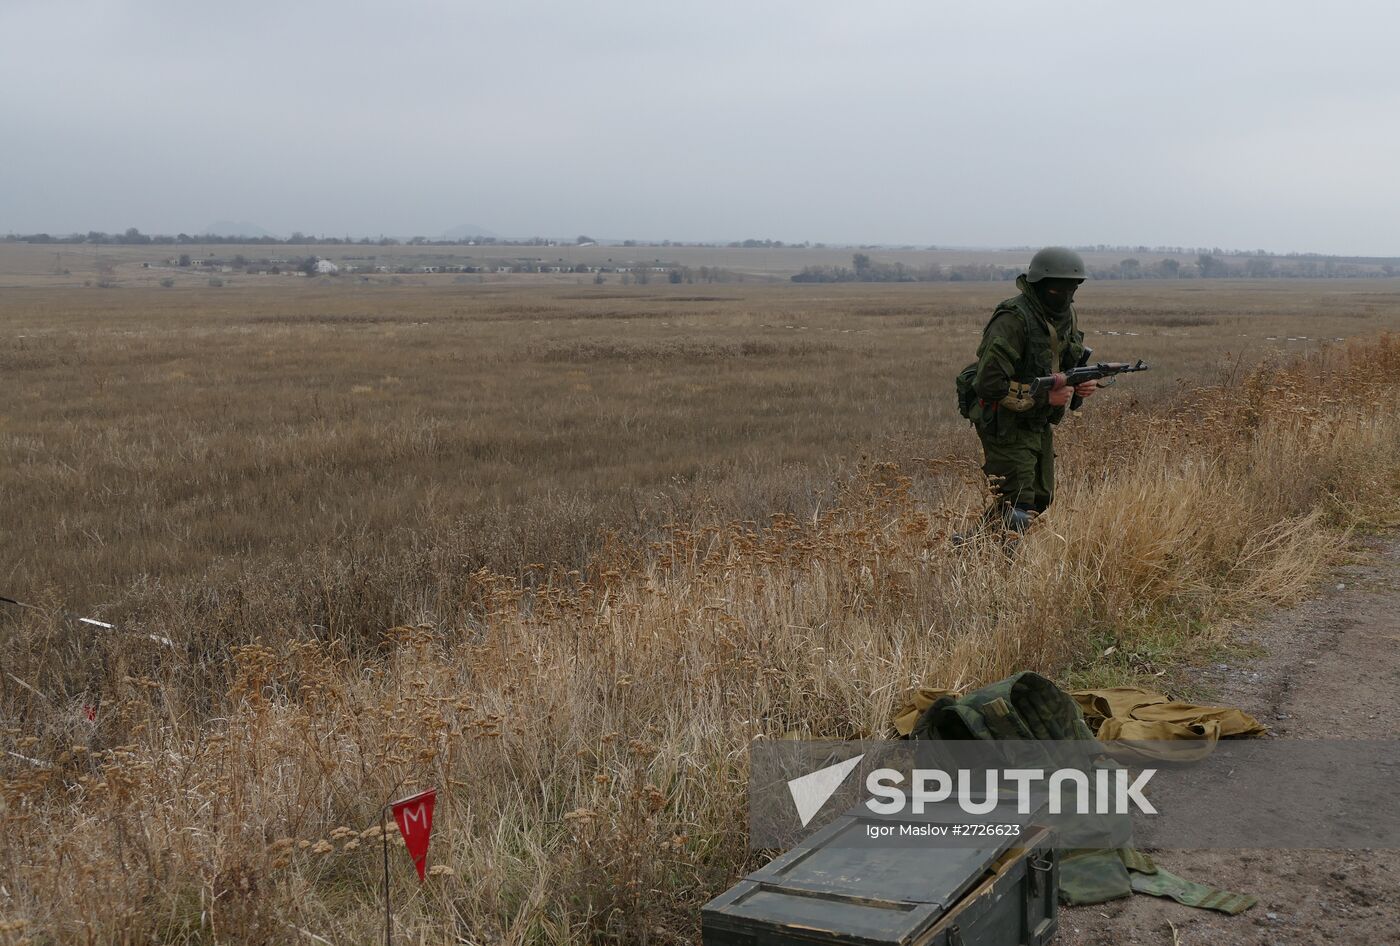 Mine clearing continues around Donetsk